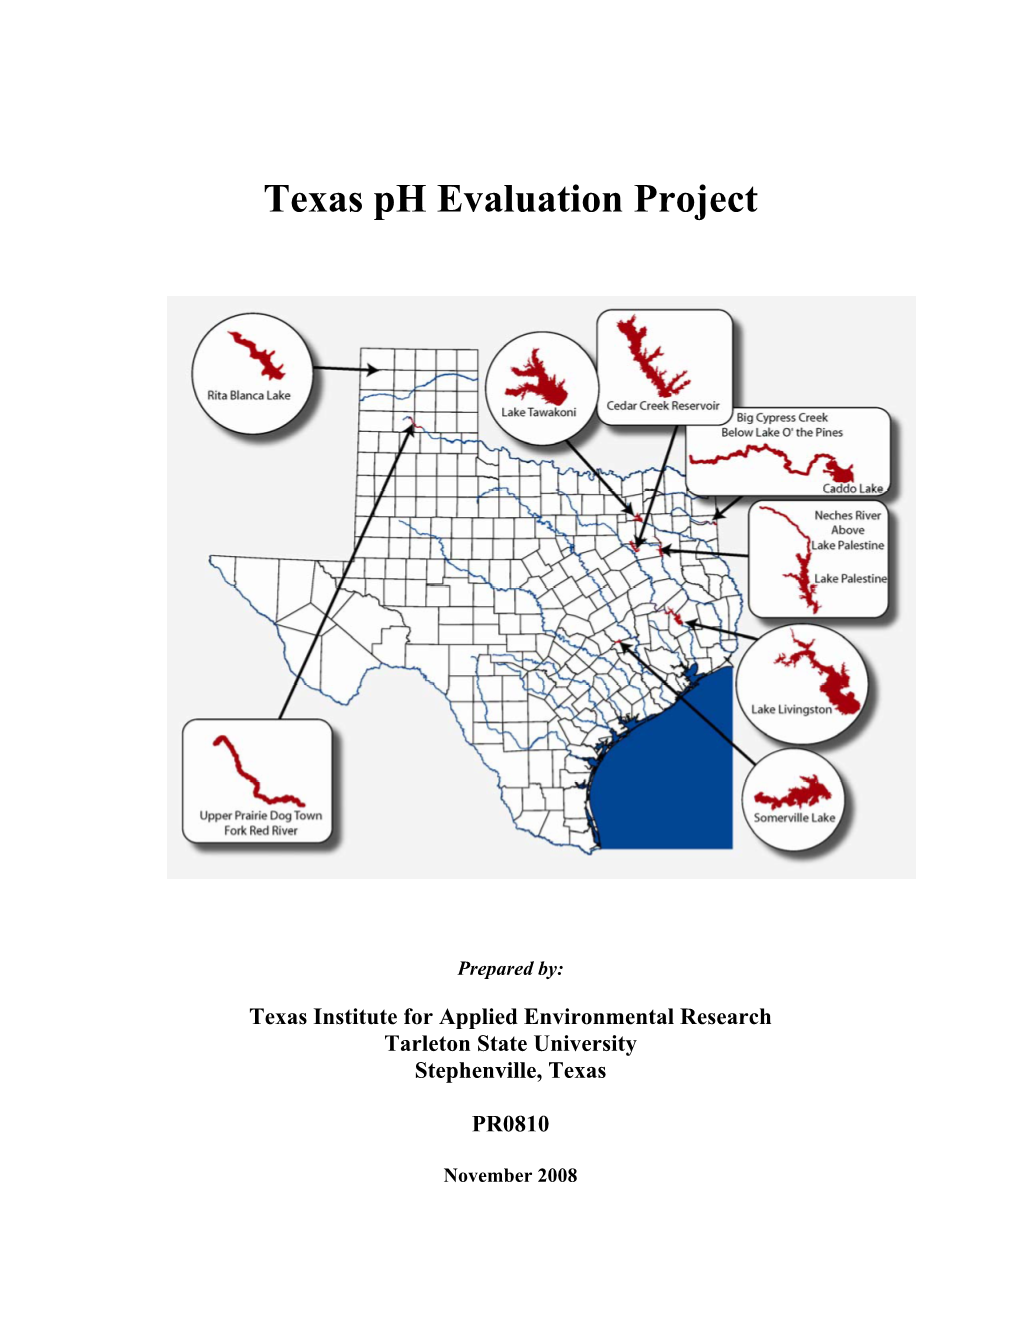 Texas Ph Evaluation Project